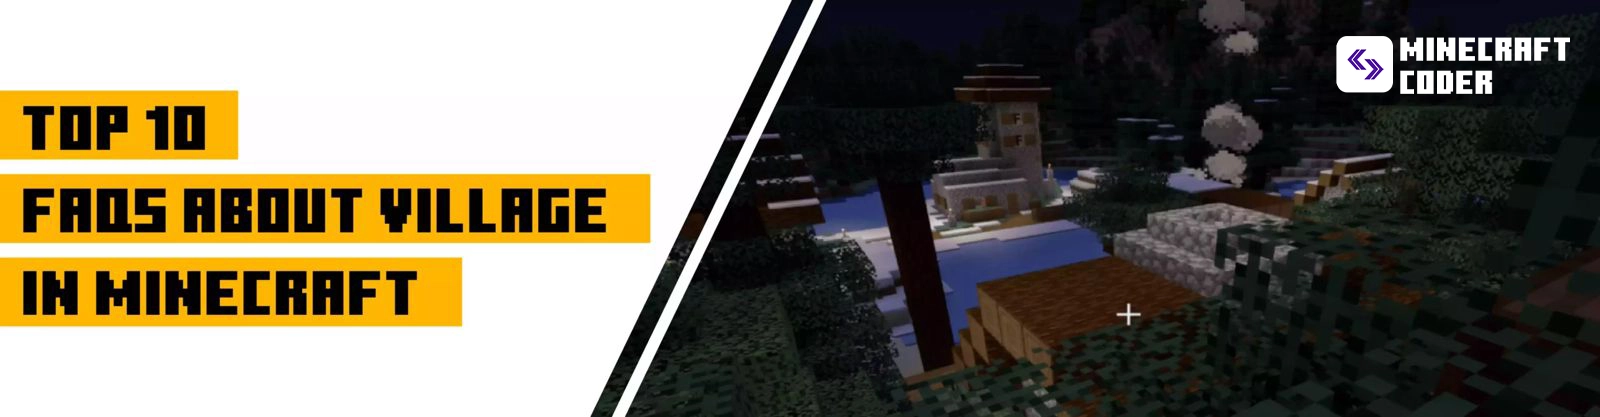 Top 10 FAQs about Village in Minecraft